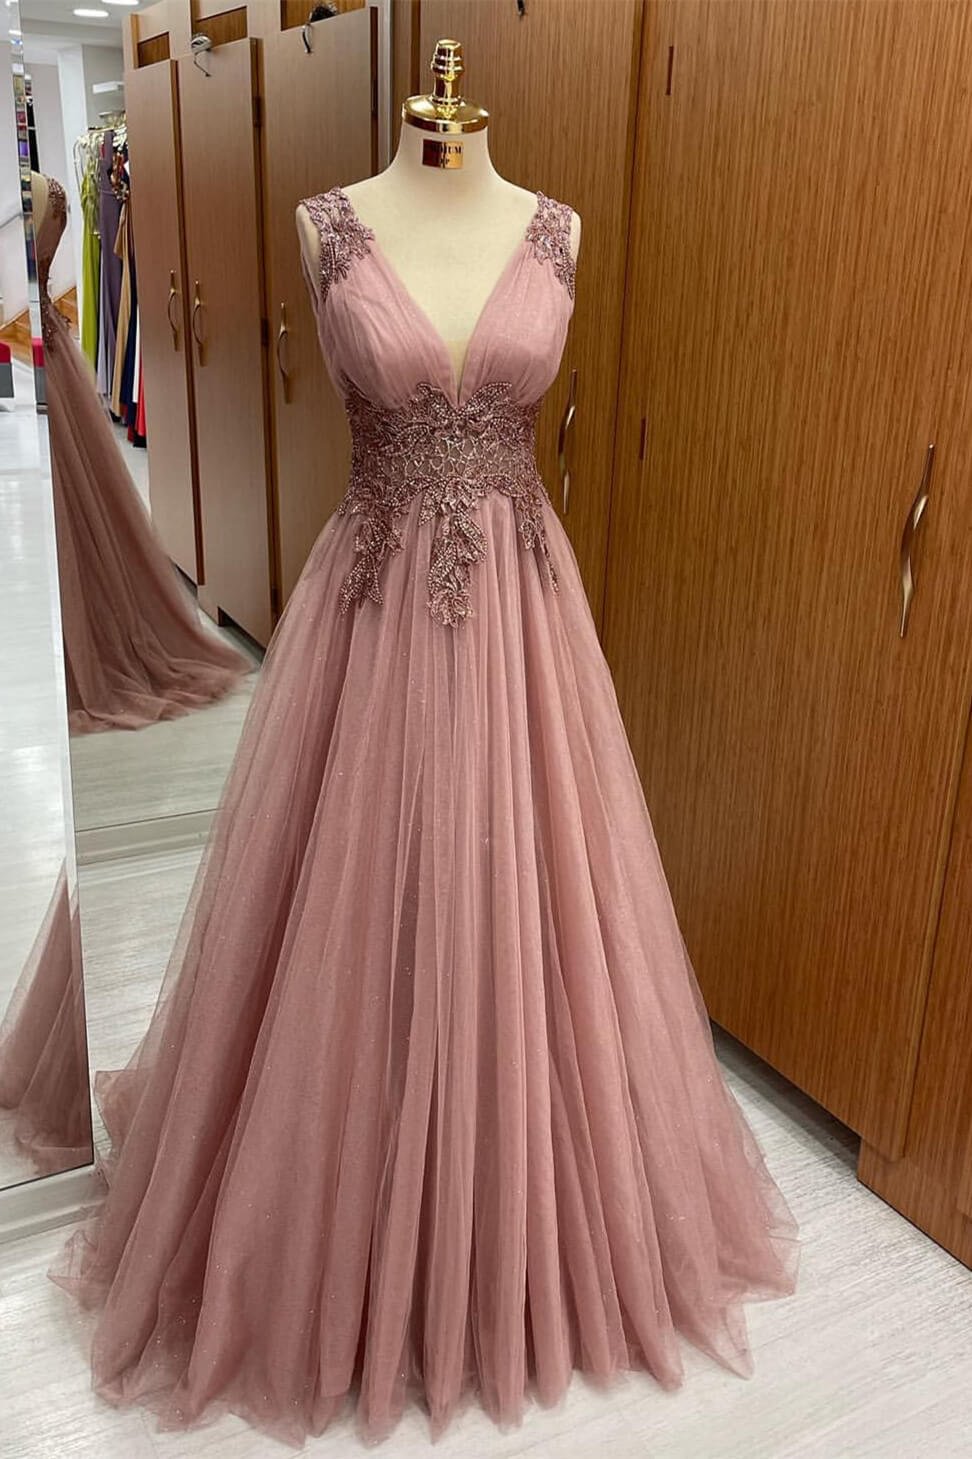 V-Neck Dusty Pink Sleeveless Prom Dress Tulle Long With Appliques | Ballbellas Ballbellas